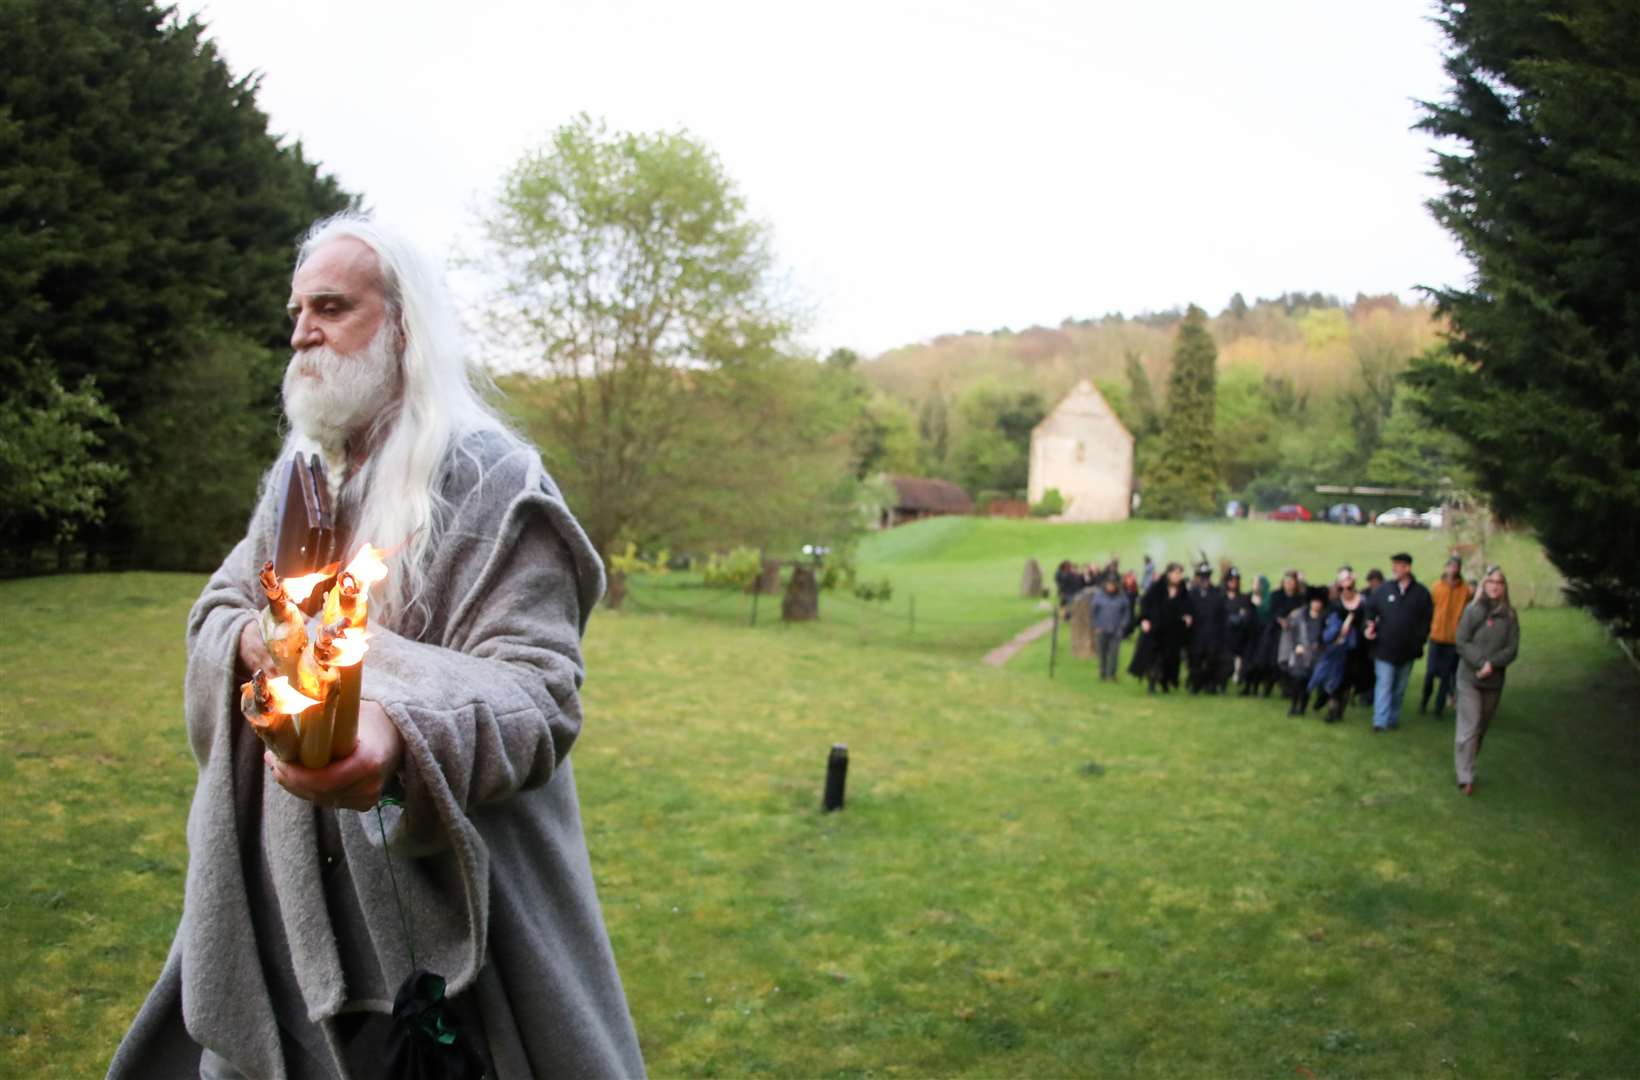 Beltane is the pagan ritual marking the end of winter